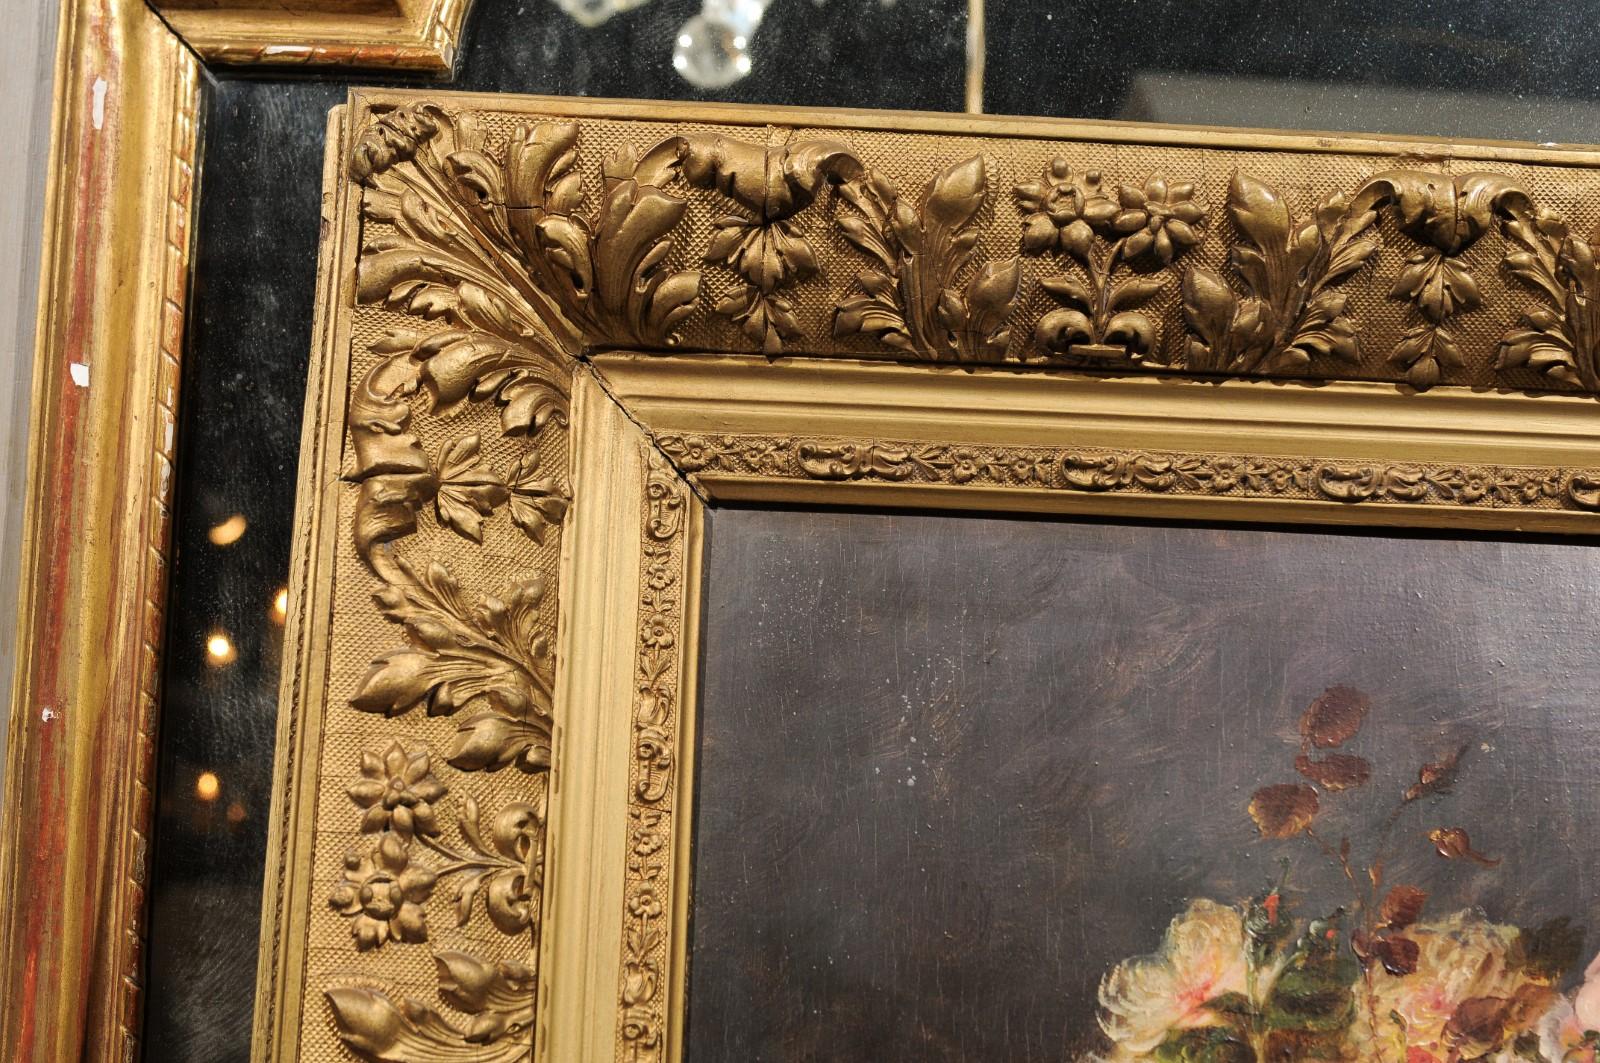 Giltwood 19th Century French Floral Still-Life Painting Depicting Roses in Original Frame For Sale